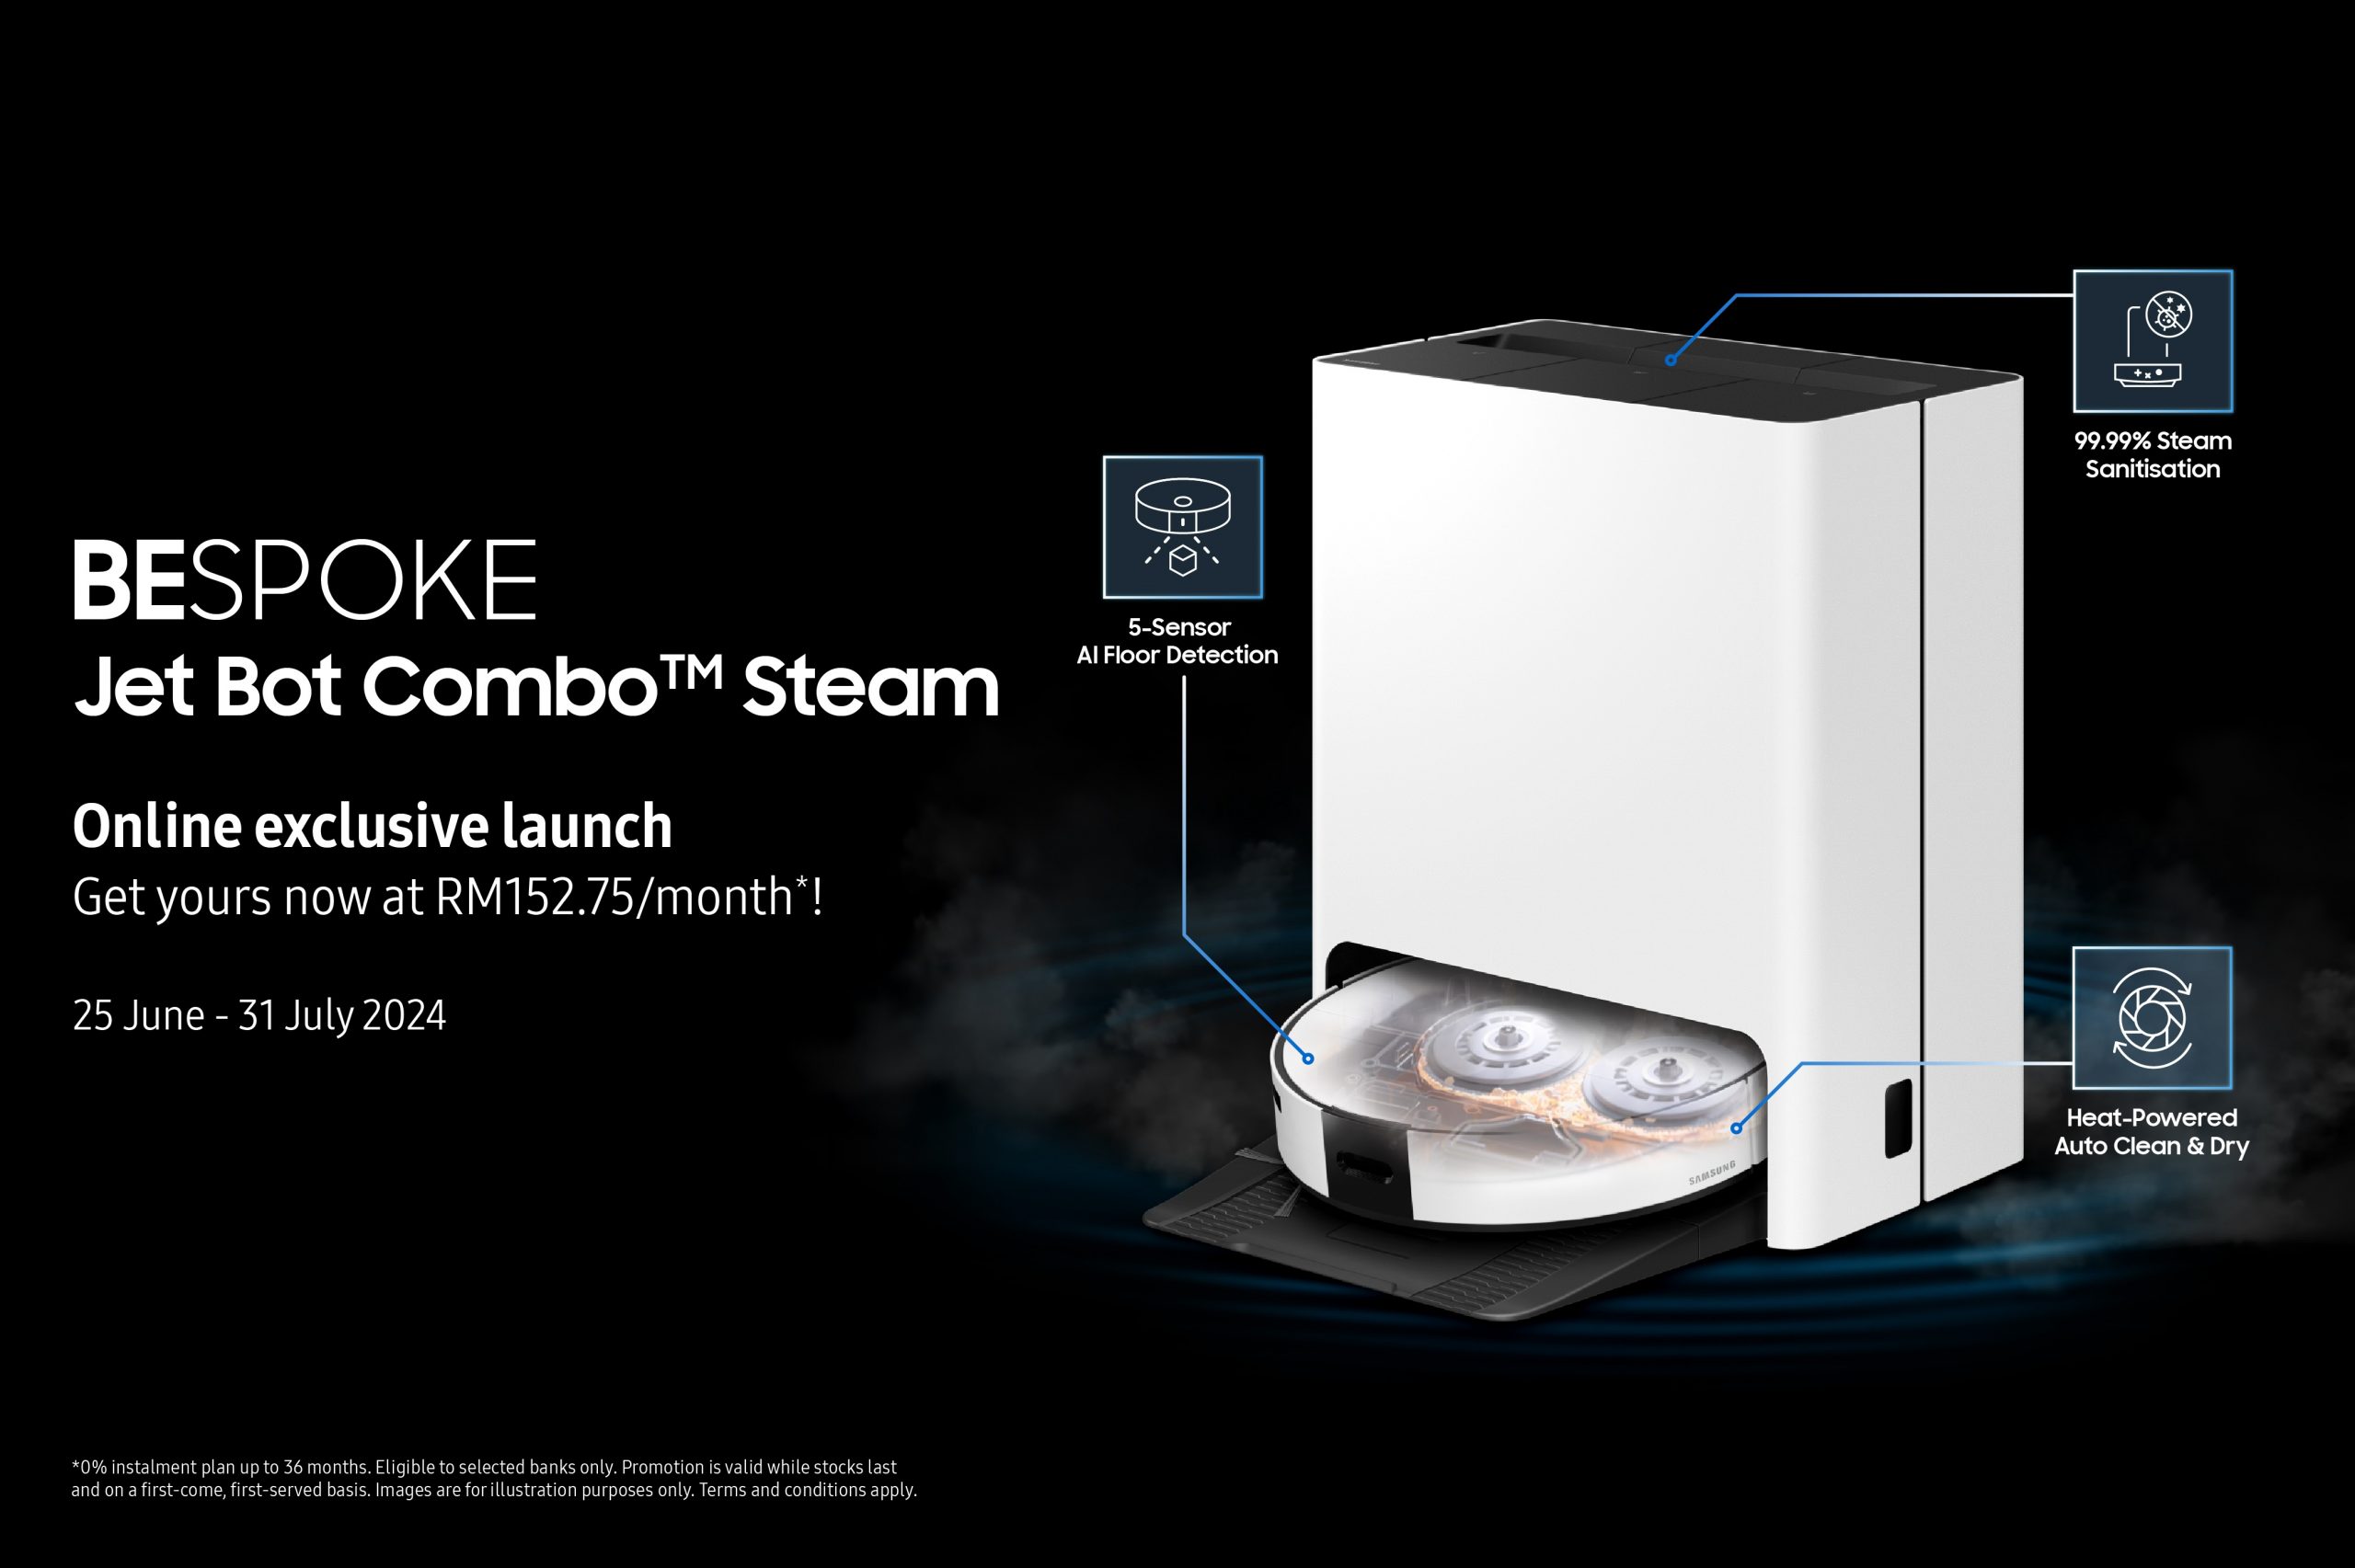 Samsung Bespoke Jet Bot Combo Steam now in Malaysia with RM2,800 launch discount